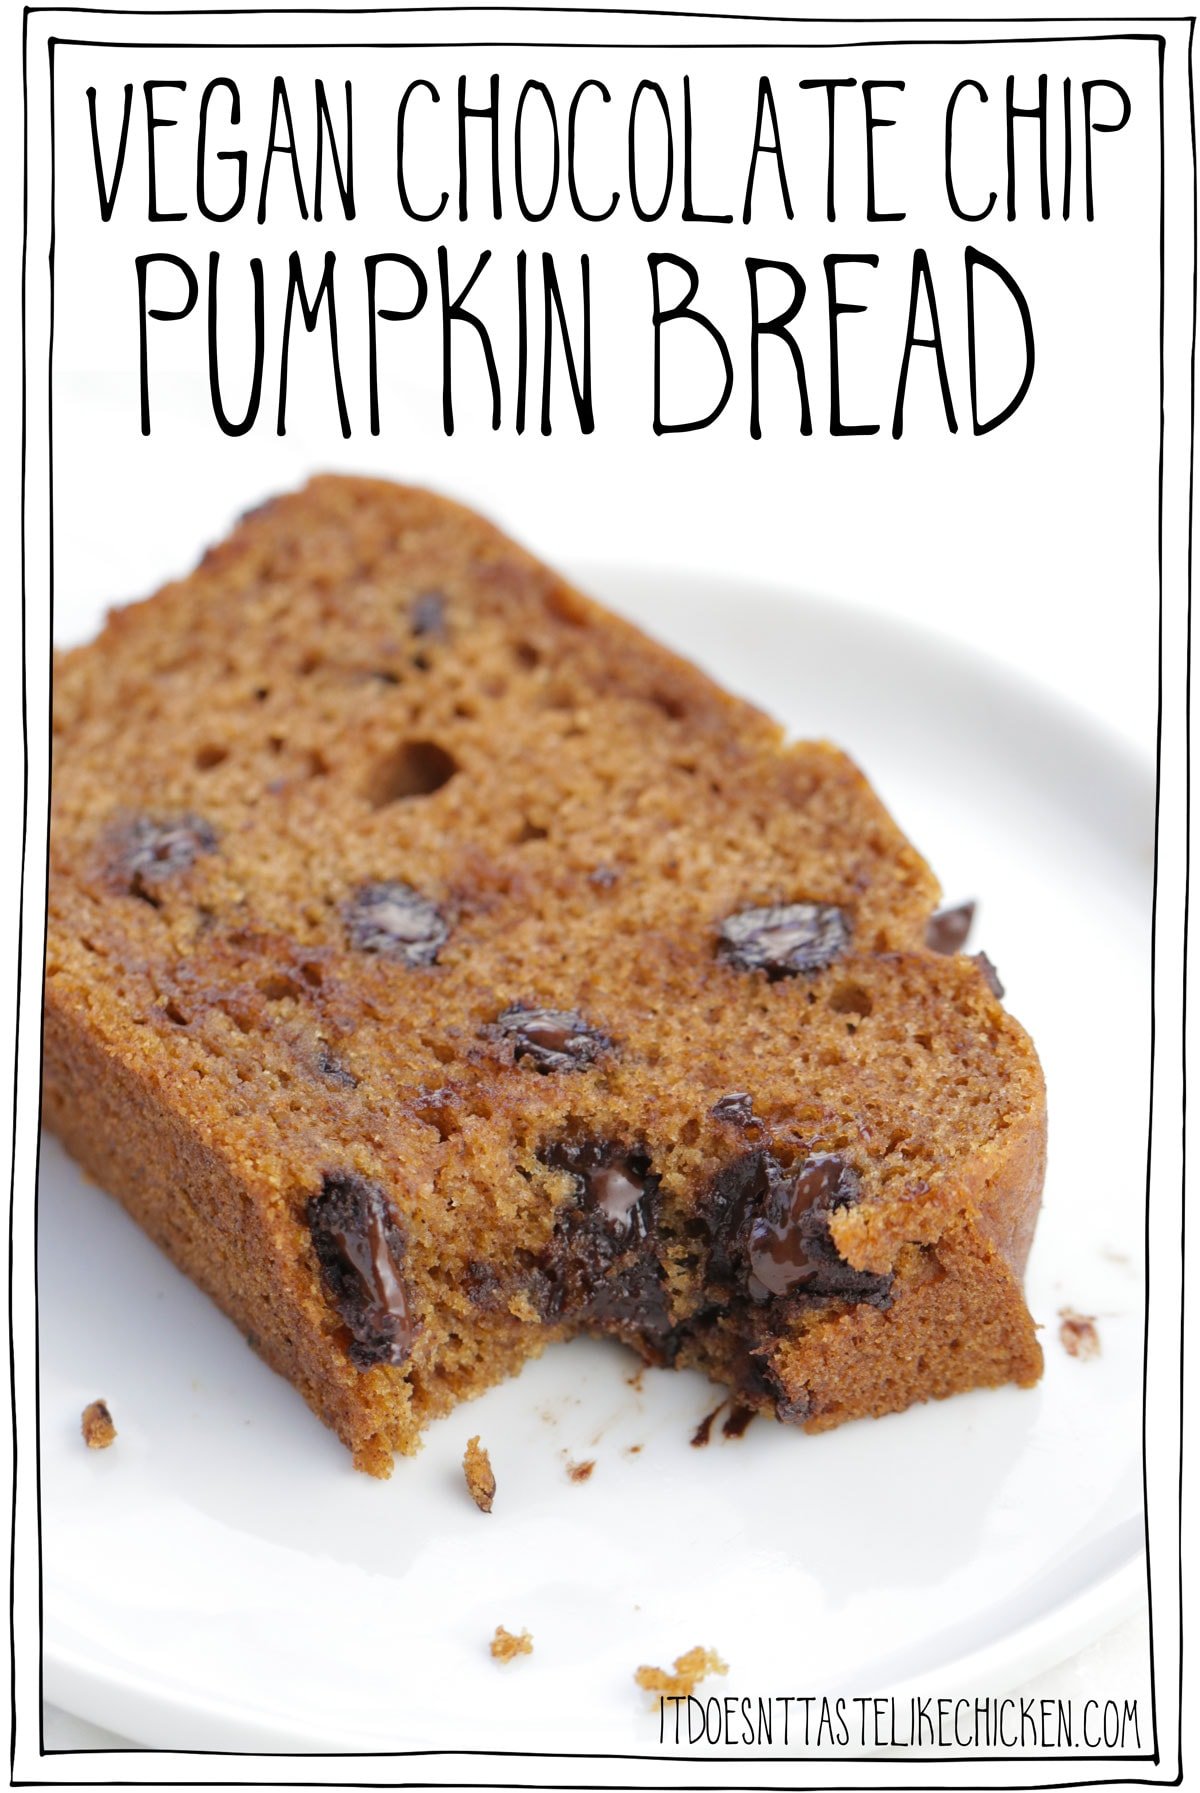 This Vegan Chocolate Chip Pumpkin Bread is so tender, it's deliciously moist, chocolatey, pumpkin infused, and surprisingly easy to make too! Just whip up the simple batter, pour in a pan, and bake. That's it. And if you don't like chocolate (weirdo), you can either omit the chocolate chips, or replace them with crunchy walnuts, pecans, or pepitas. #itdoesnttastelikechicken #veganbaking #pumpkin